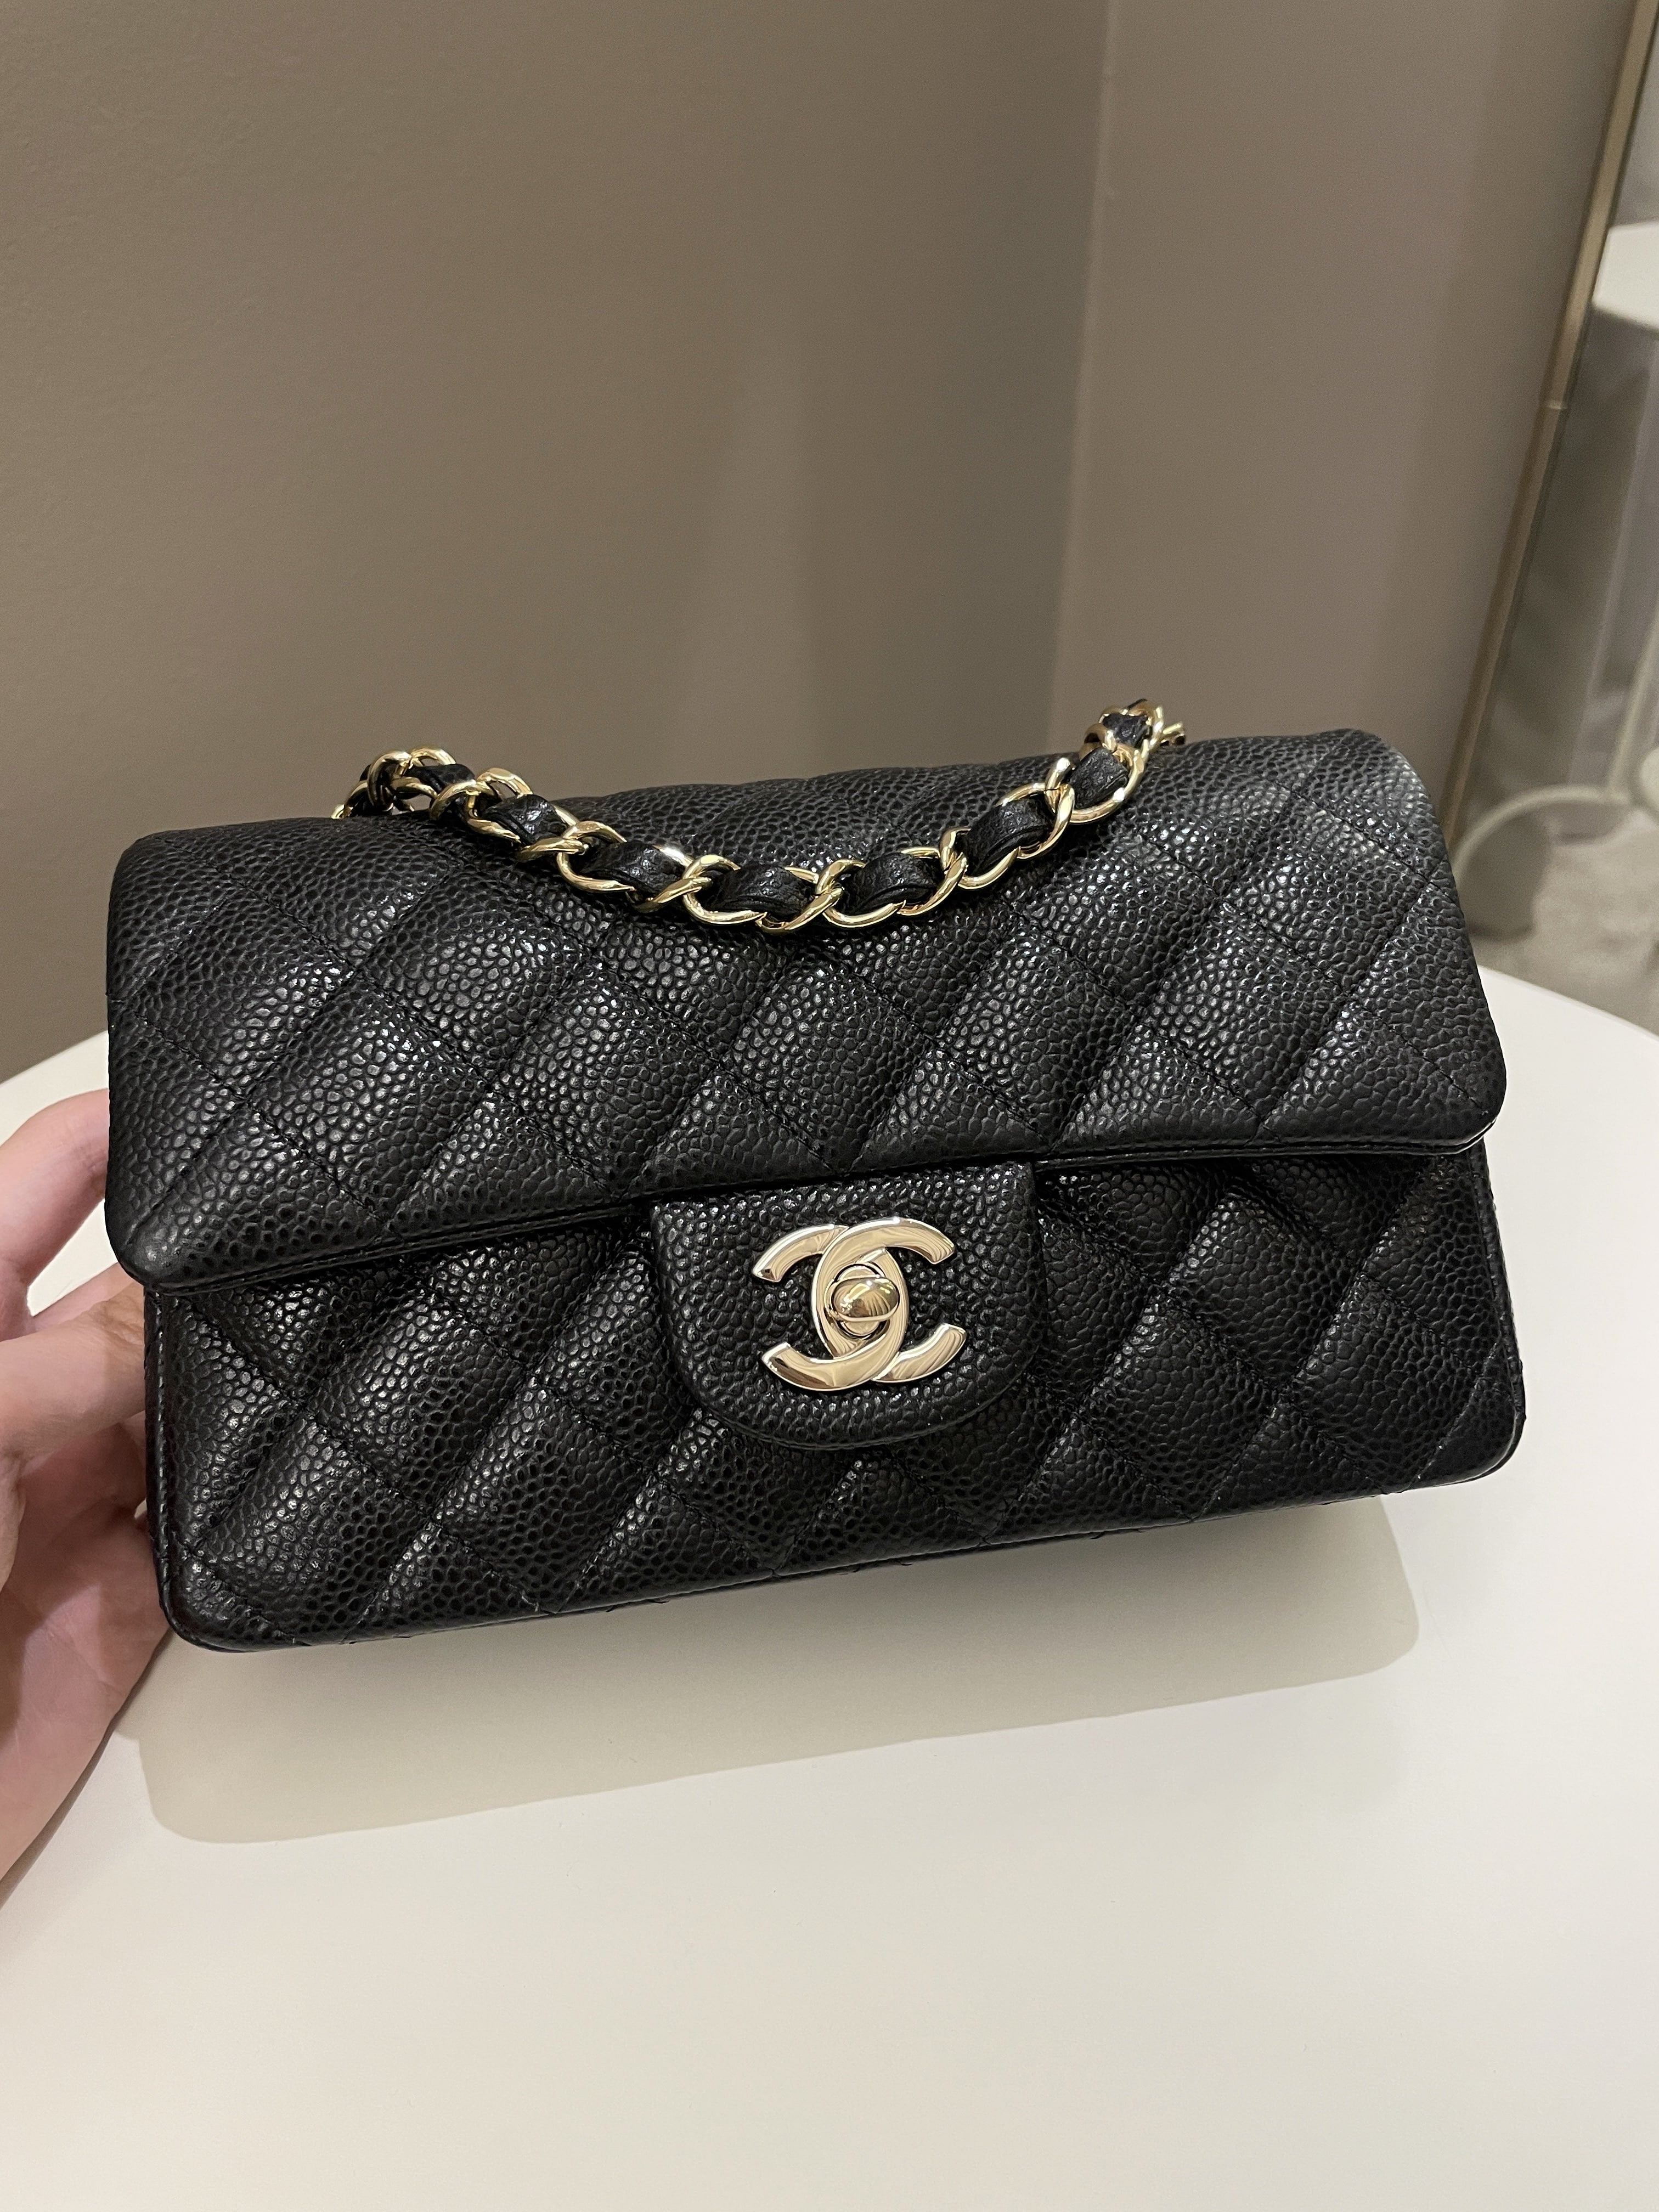 Chanel Black Quilted Caviar Leather Mini Classic Flap Chain Belt Bag 3c1026